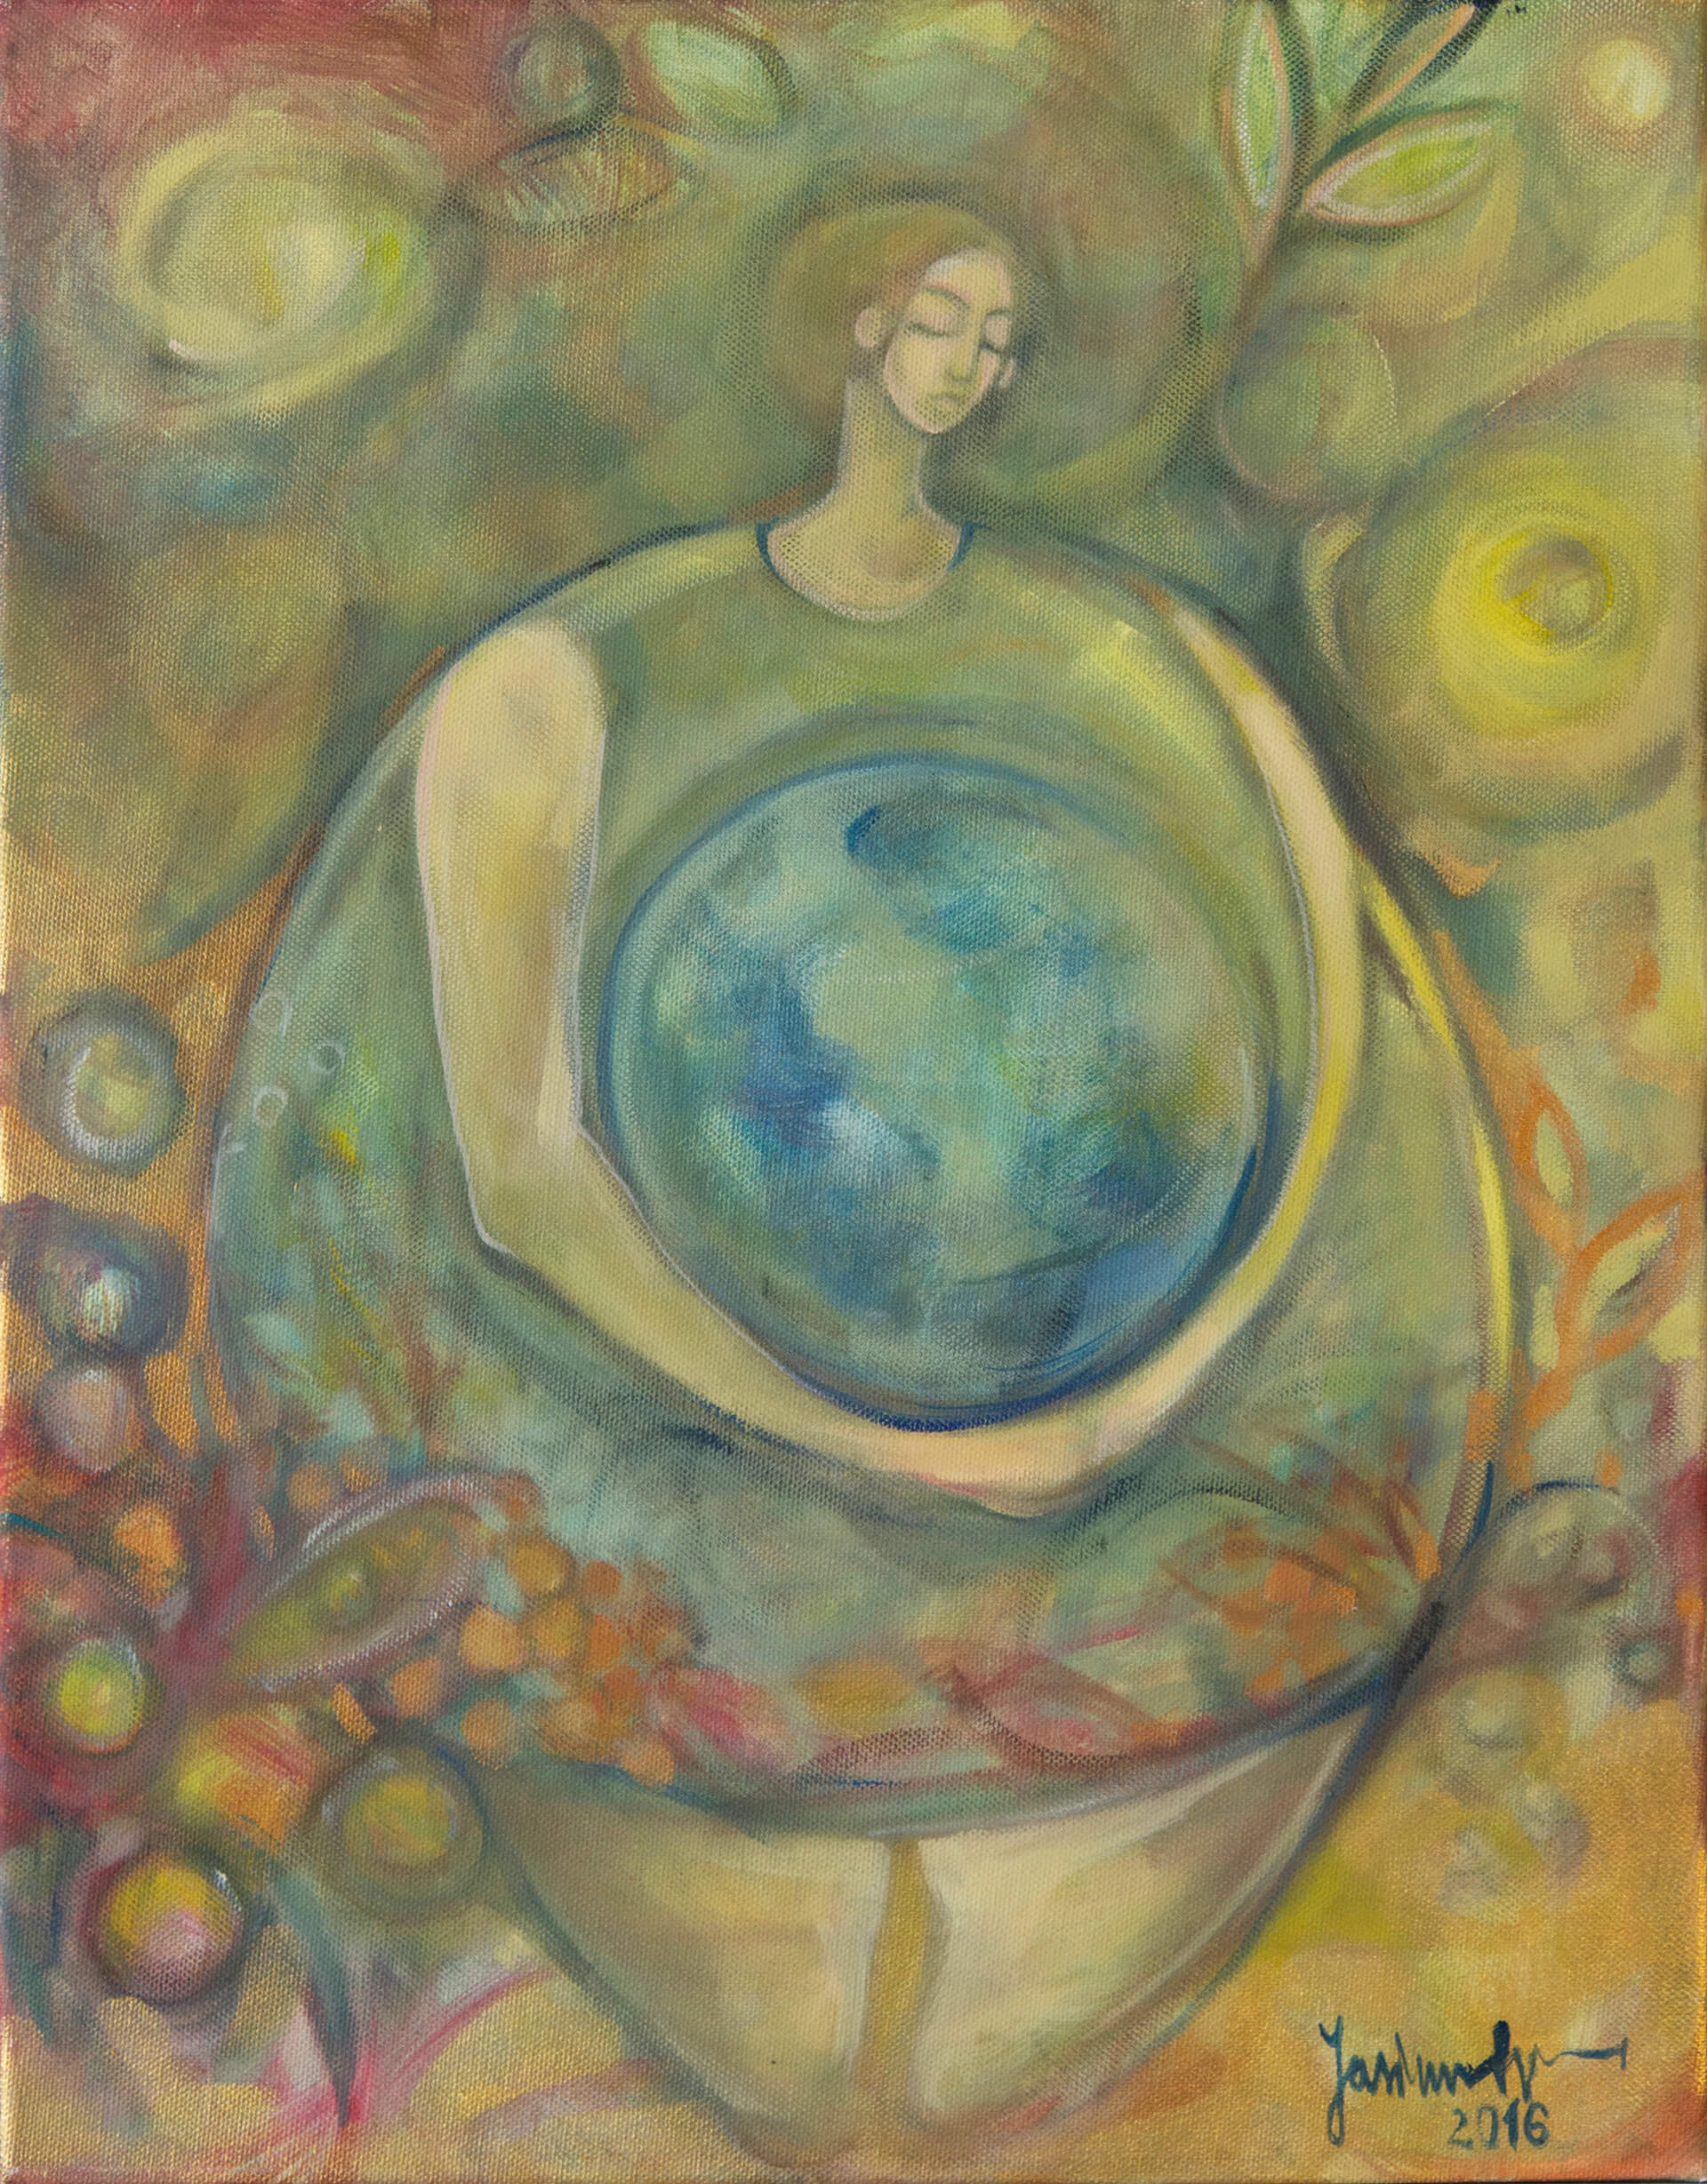 Woman with globe. 50x60 cm. Oil on canvas. Sold